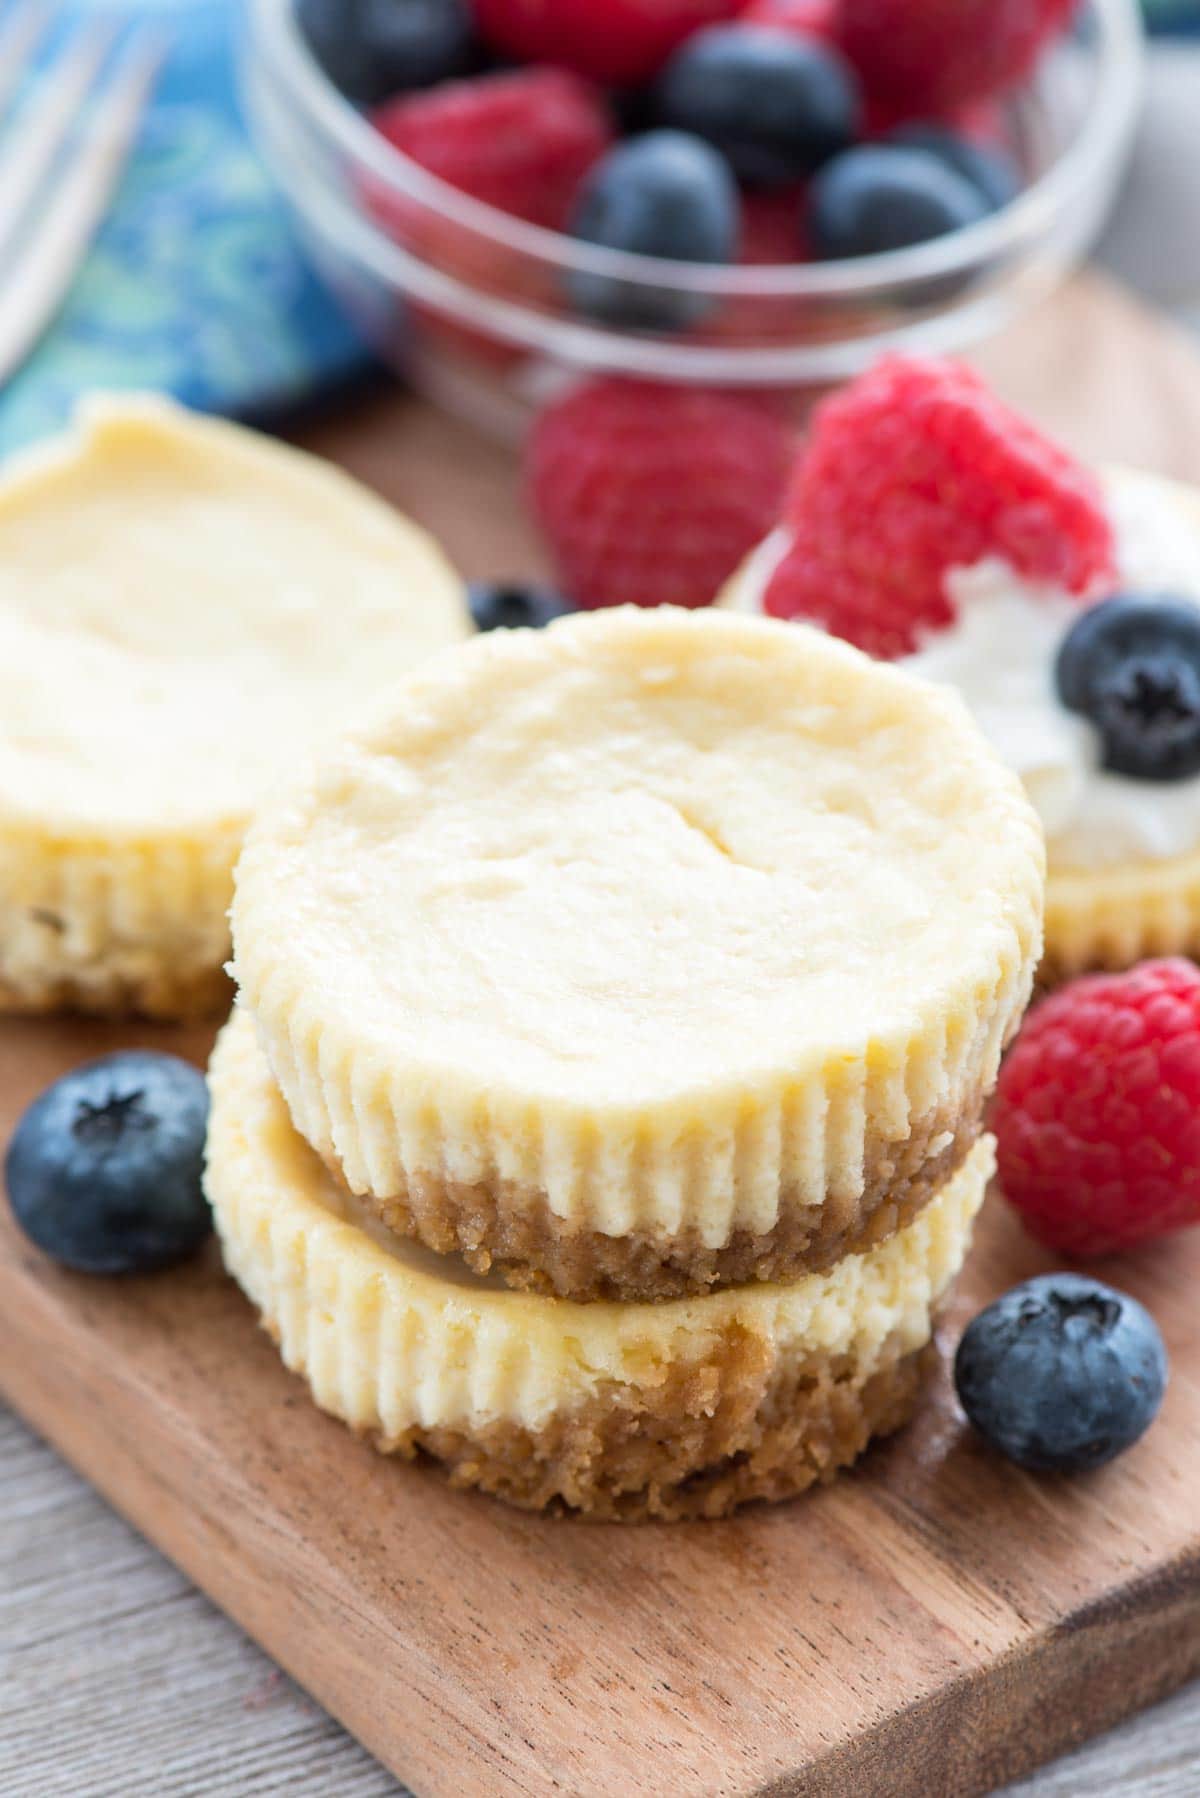 Easy Mini Cheesecake Recipe - this simple cheesecake recipe makes 12 perfect mini cheesecakes and can be made so many ways! Lemon, Oreo, S'mores, Fruit, Peanut Butter Cup - any cheesecake you want in no time at all.